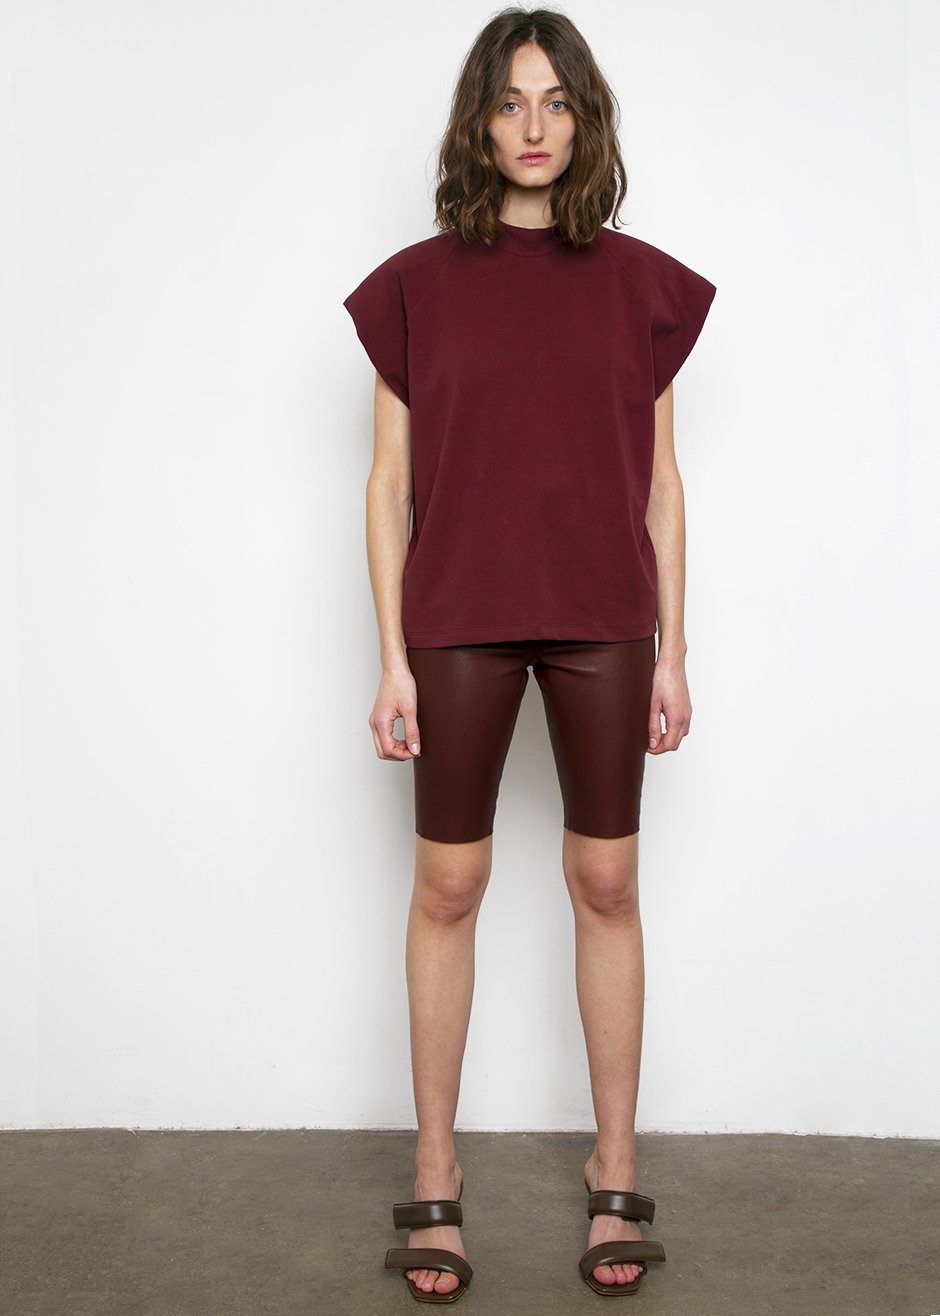 REMAIN Snipe Leather Shorts - Port Royale - 2